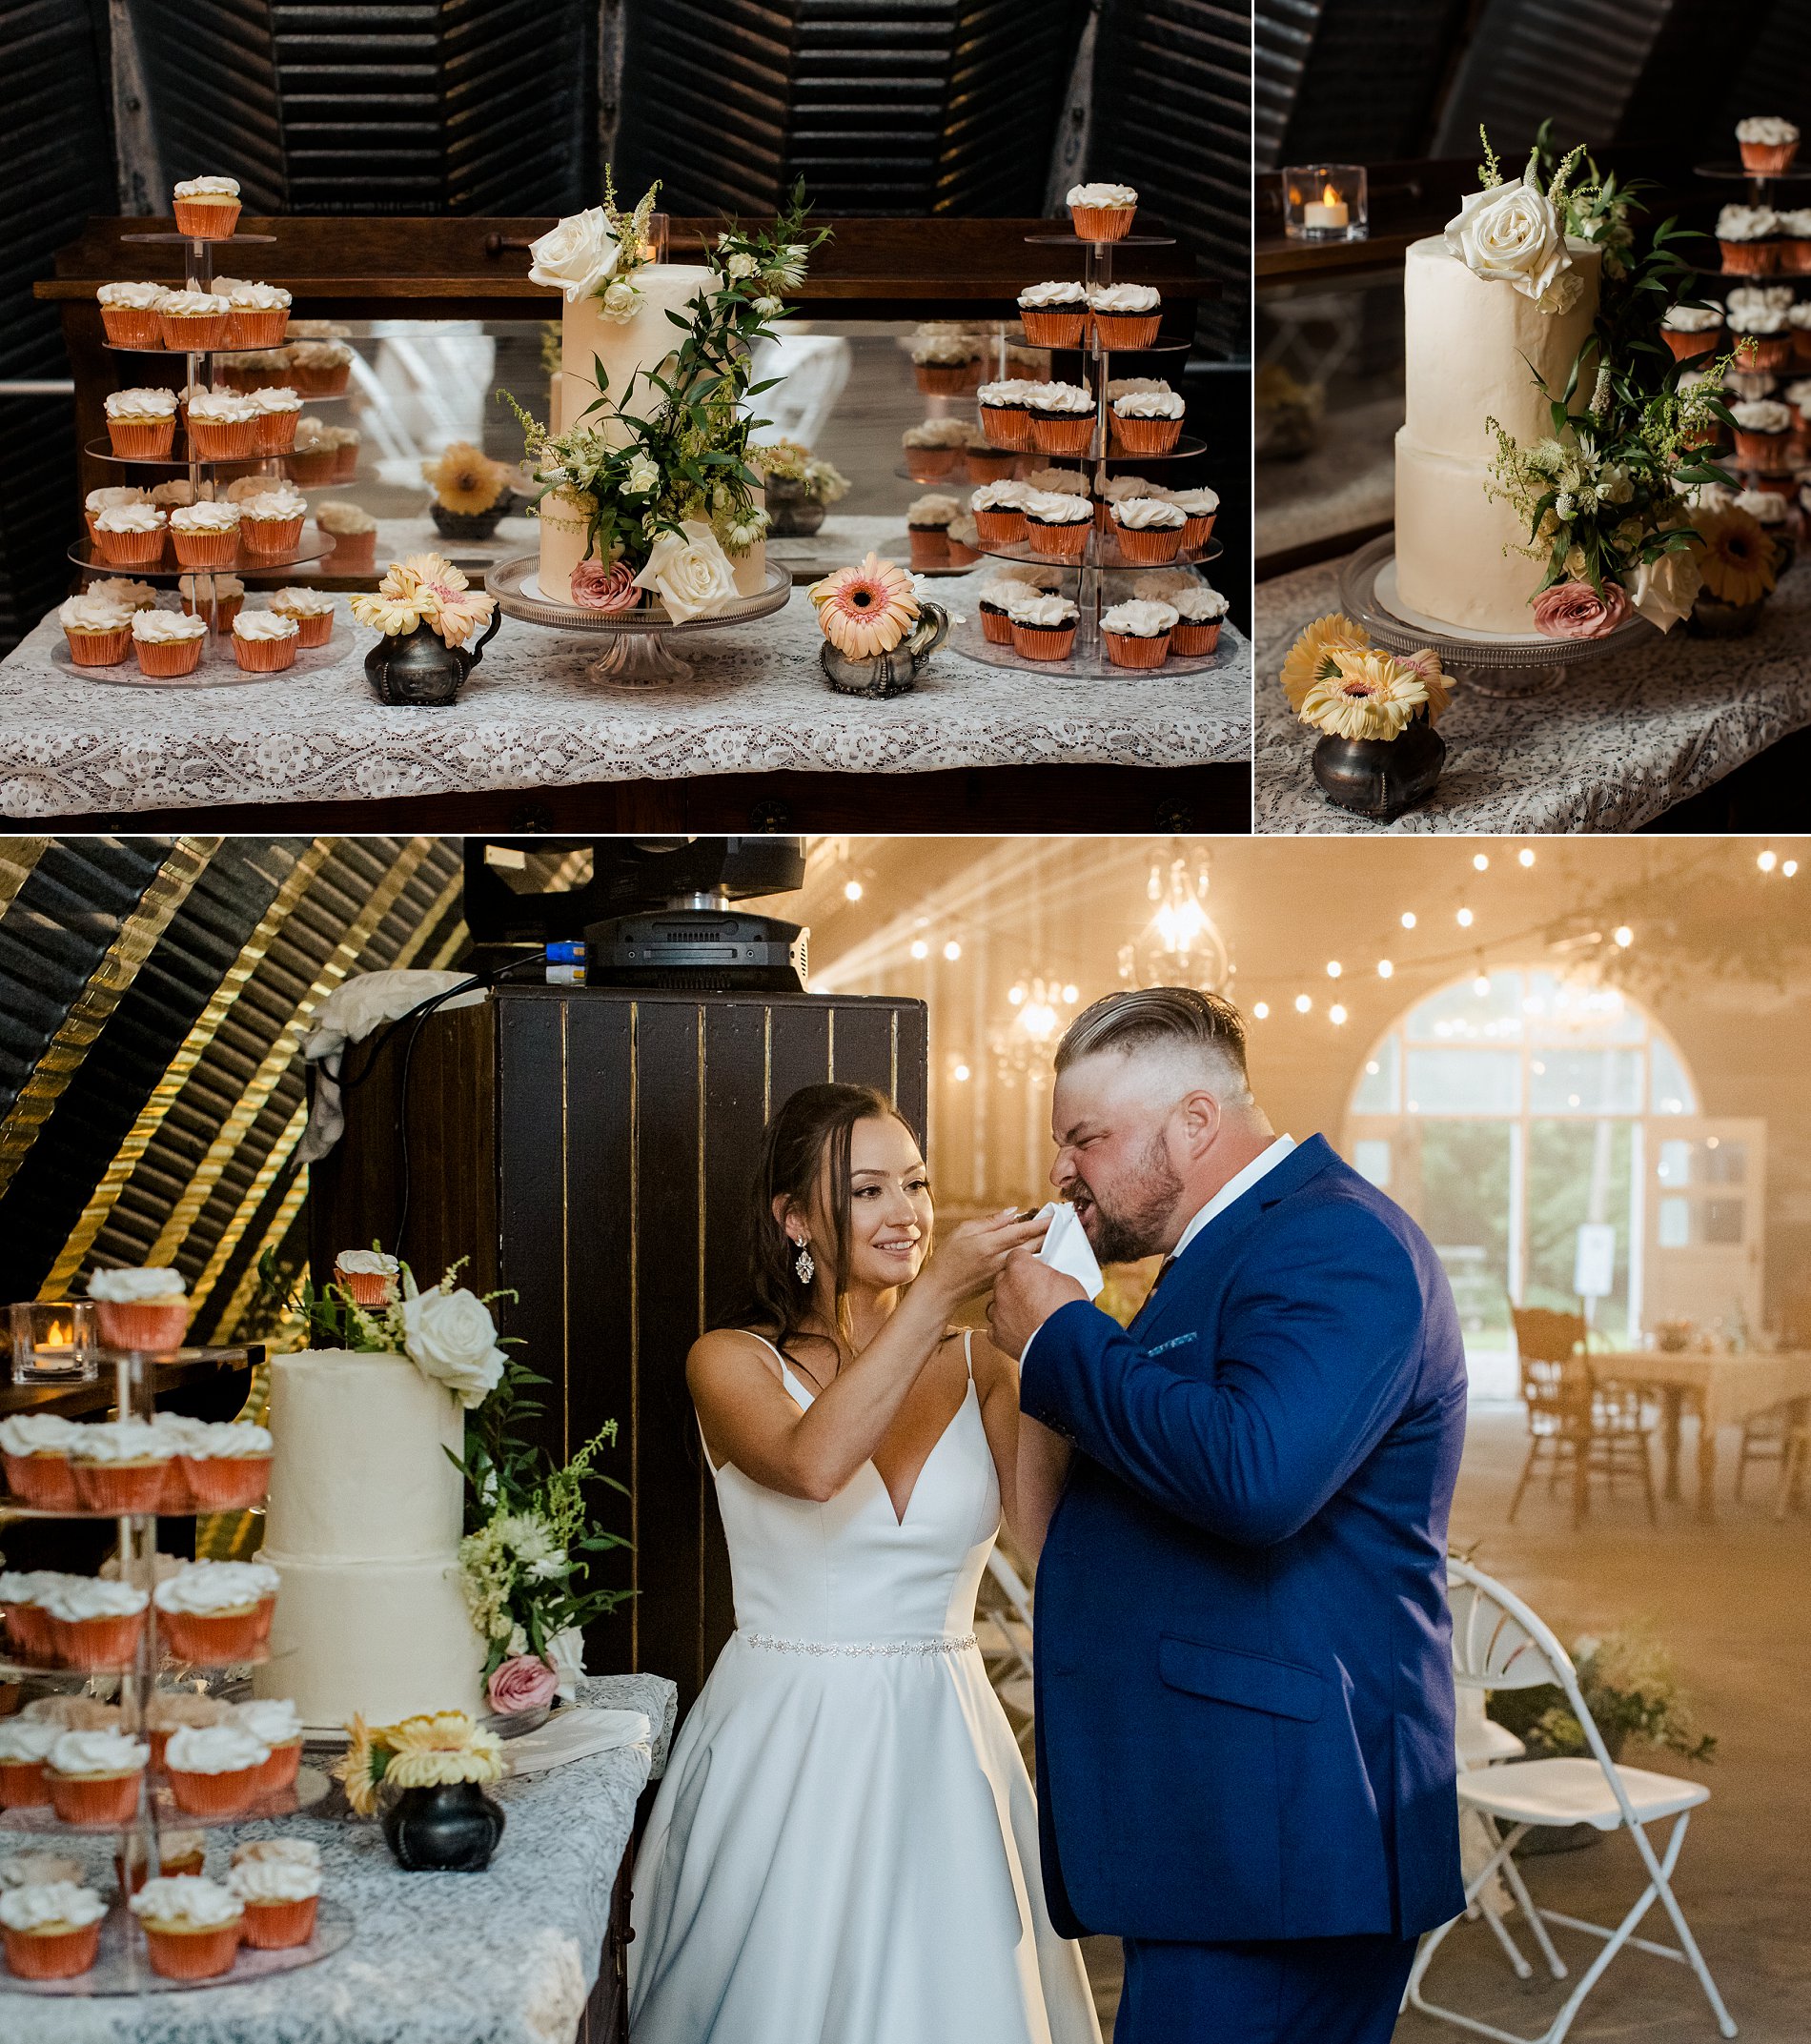 Bride and groom cut their rustic wedding cake at their intimate wedding reception.